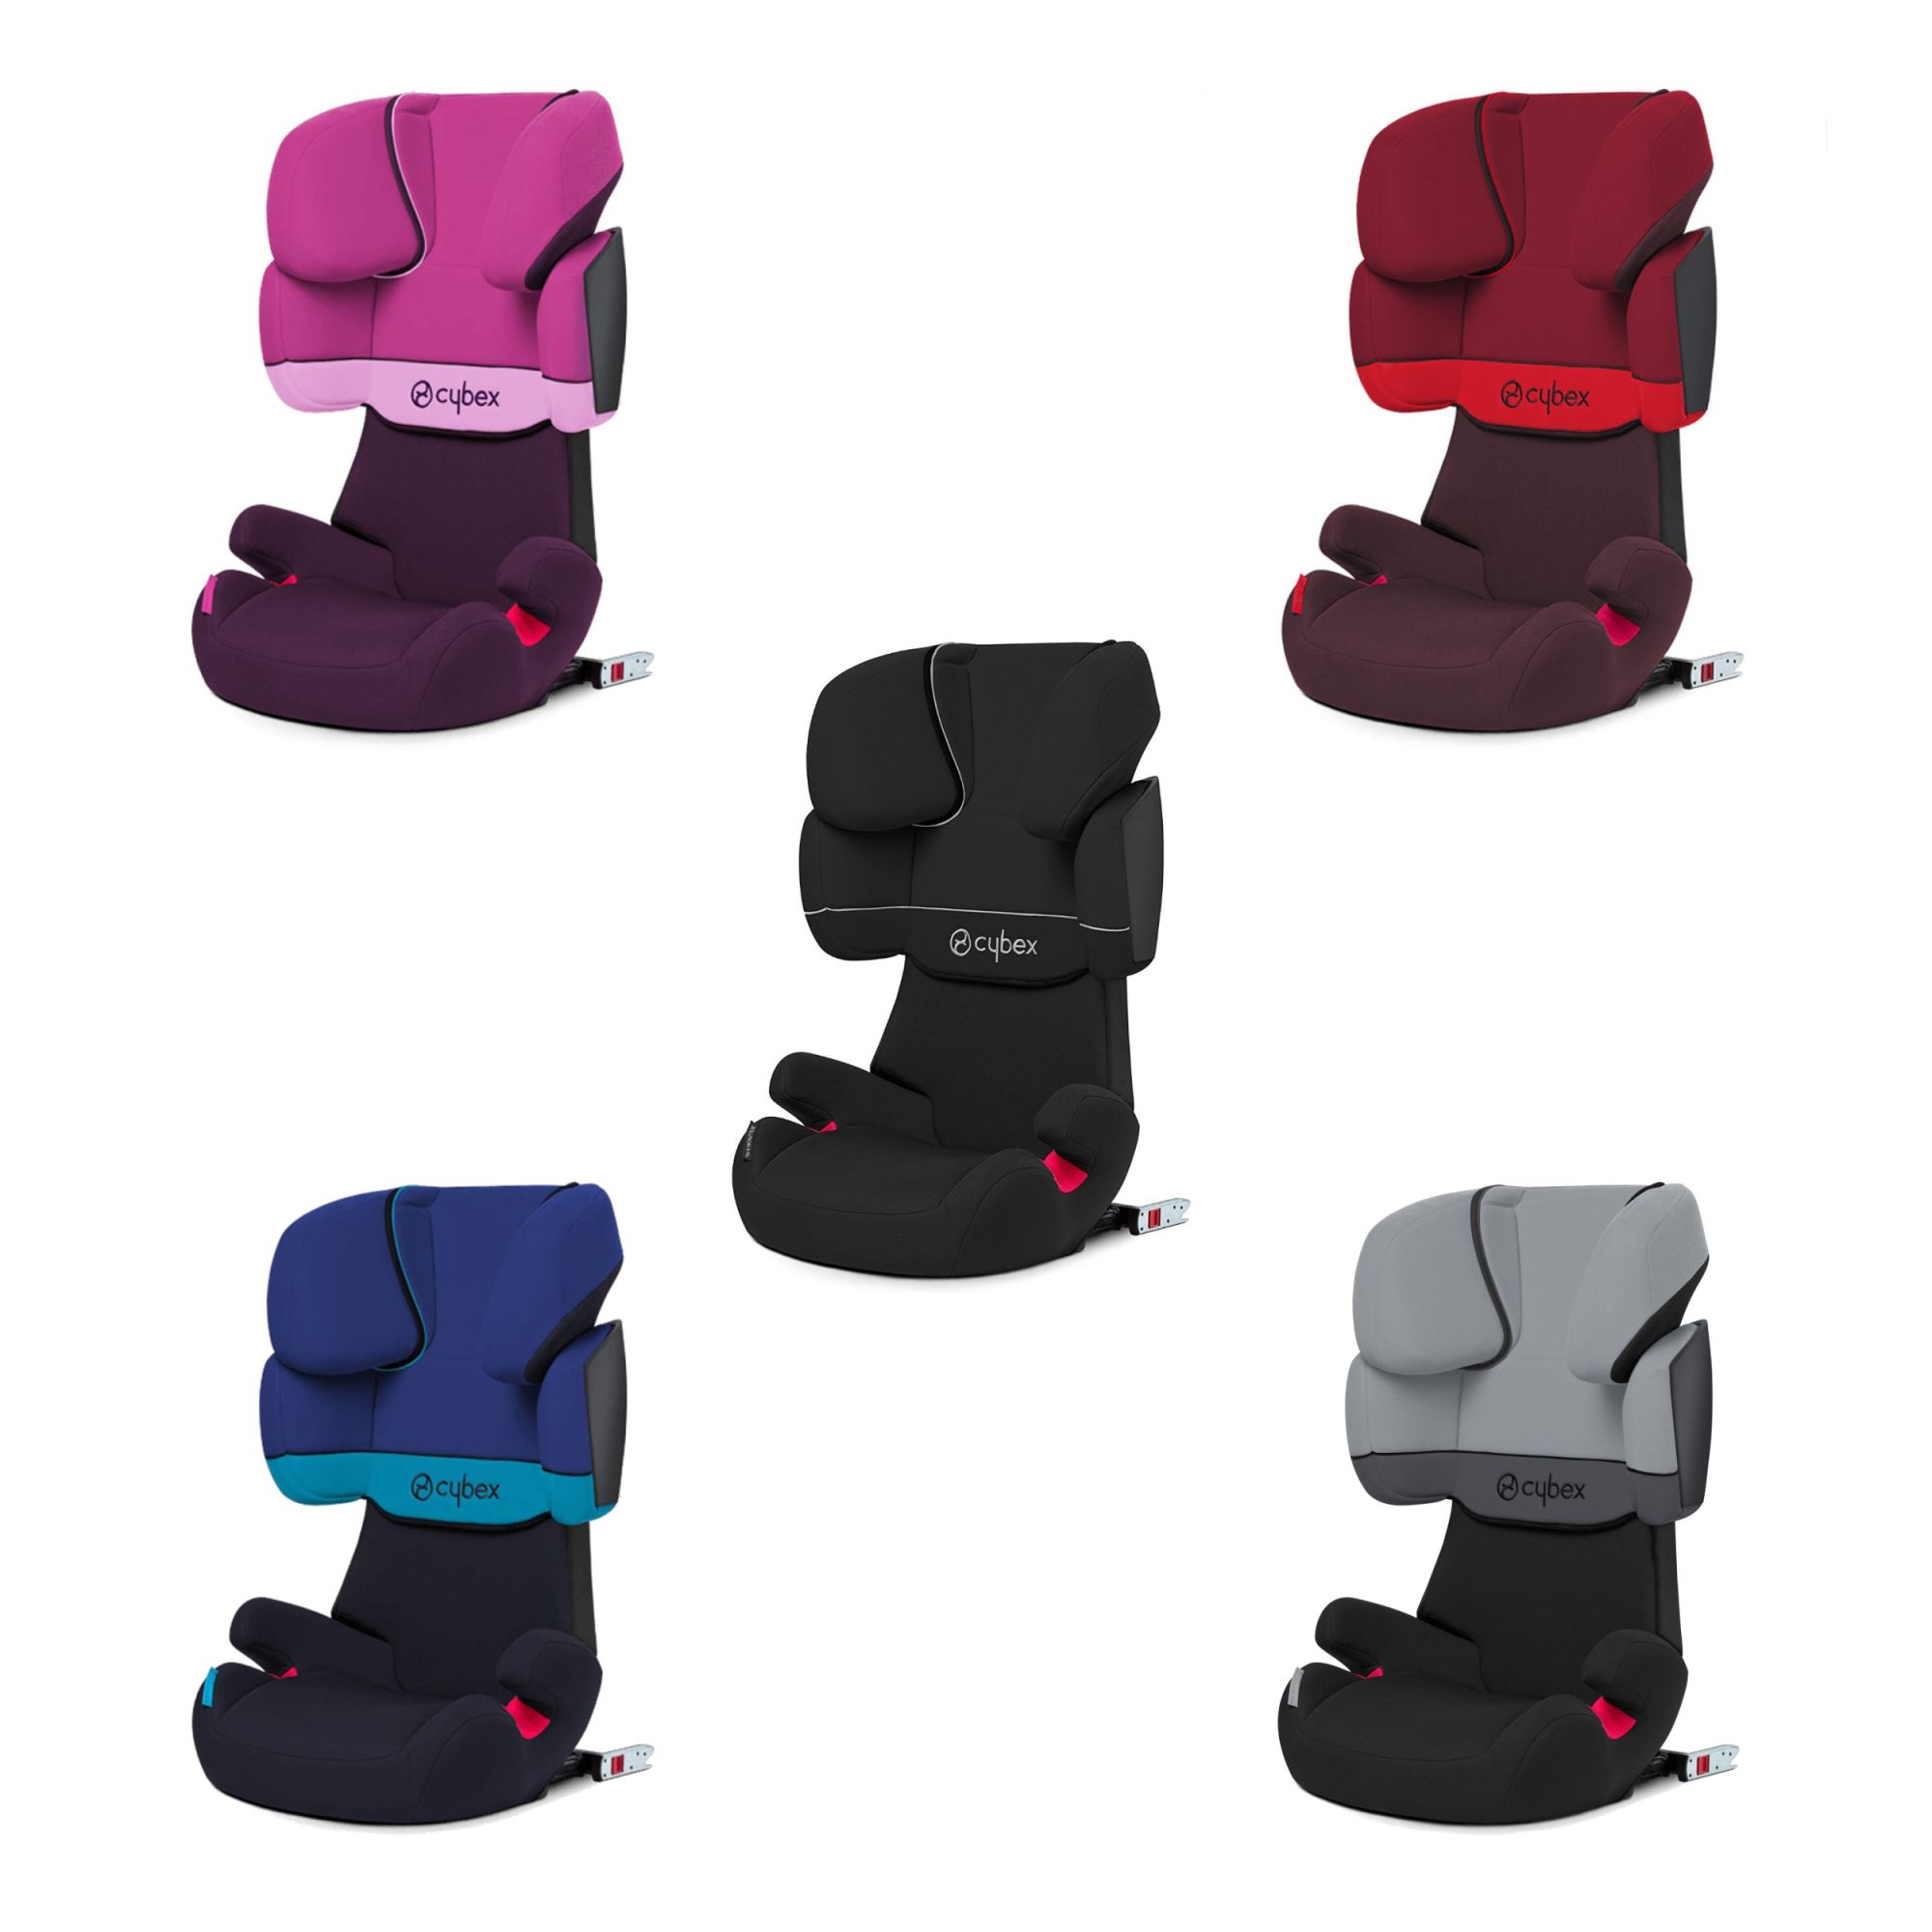 isofix booster seat with harness